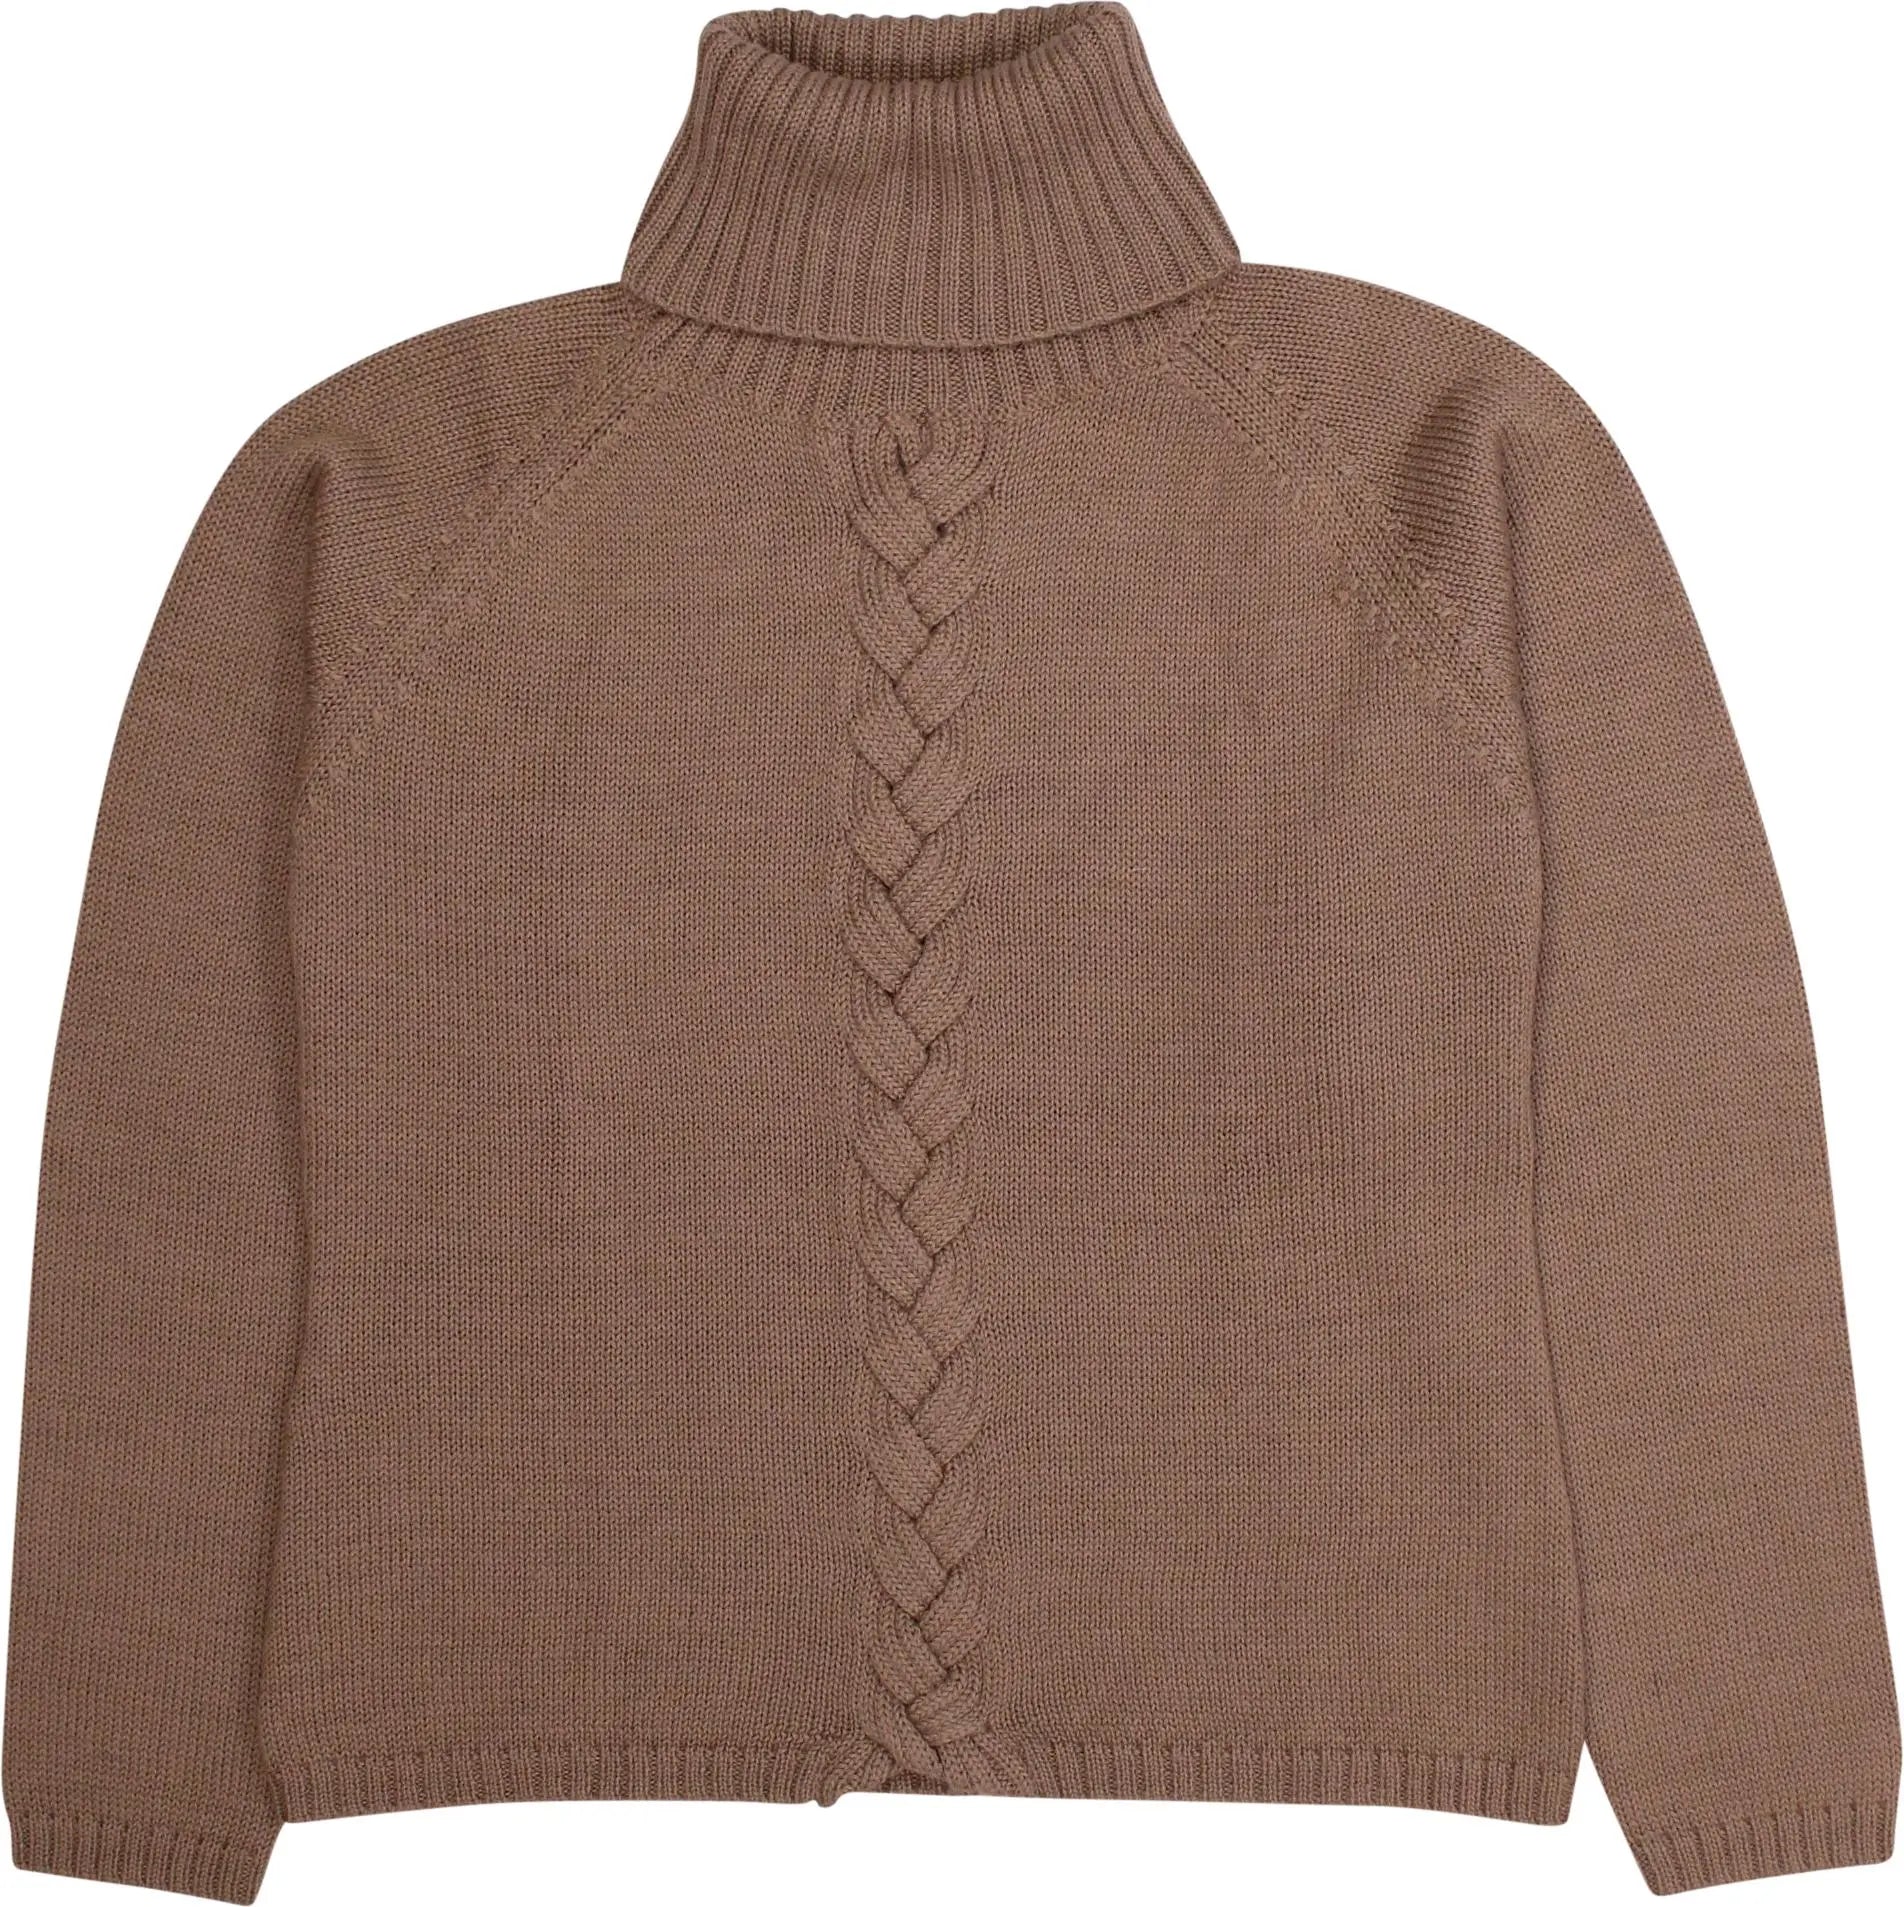 Vice Versa - Wool Blend Brown Knitted Turtleneck Jumper- ThriftTale.com - Vintage and second handclothing